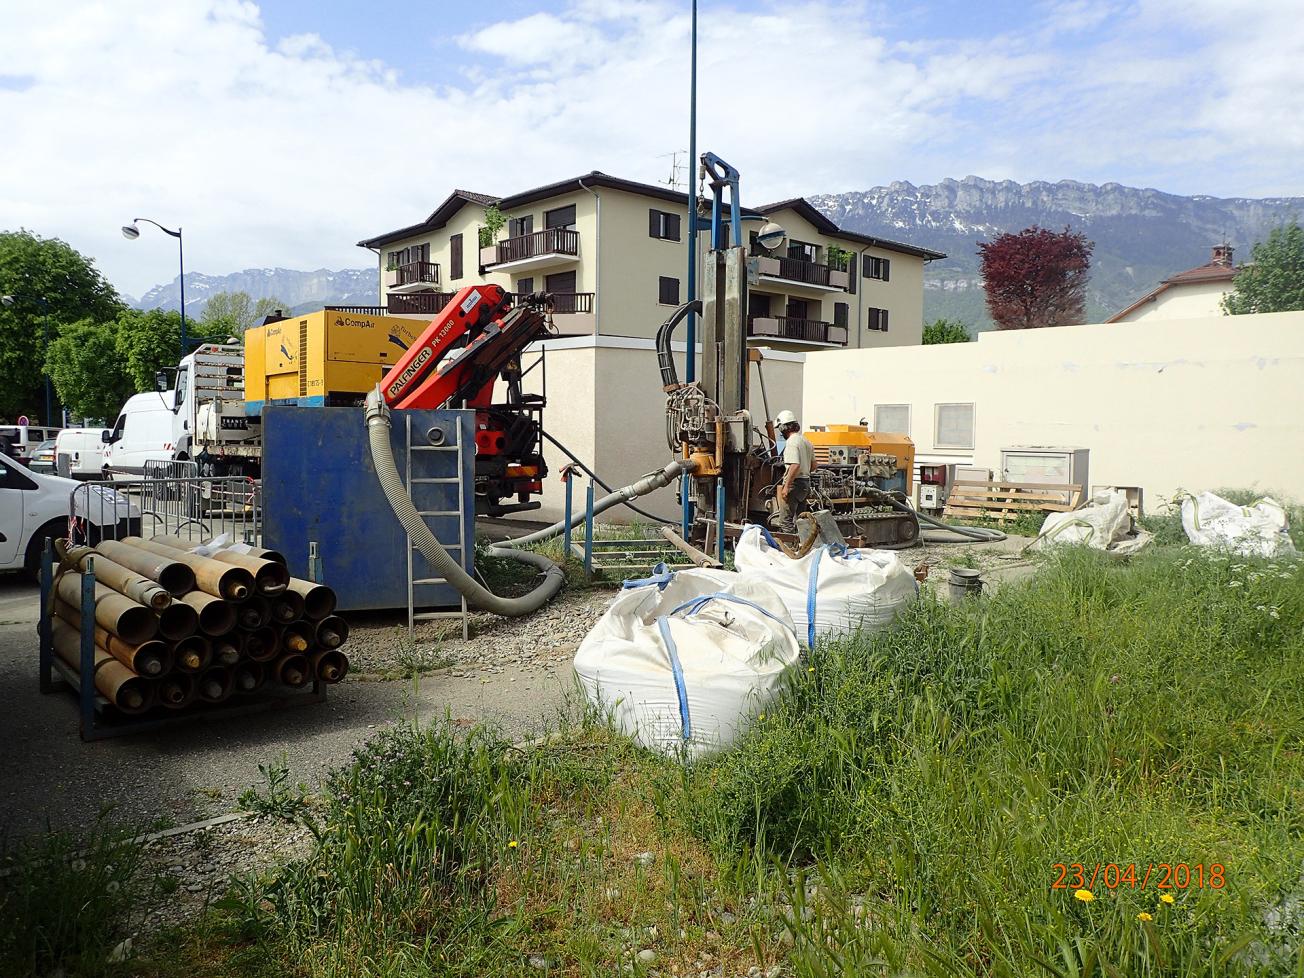 Drilling of a borehole for installing a monitoring piezometer in an urban environment